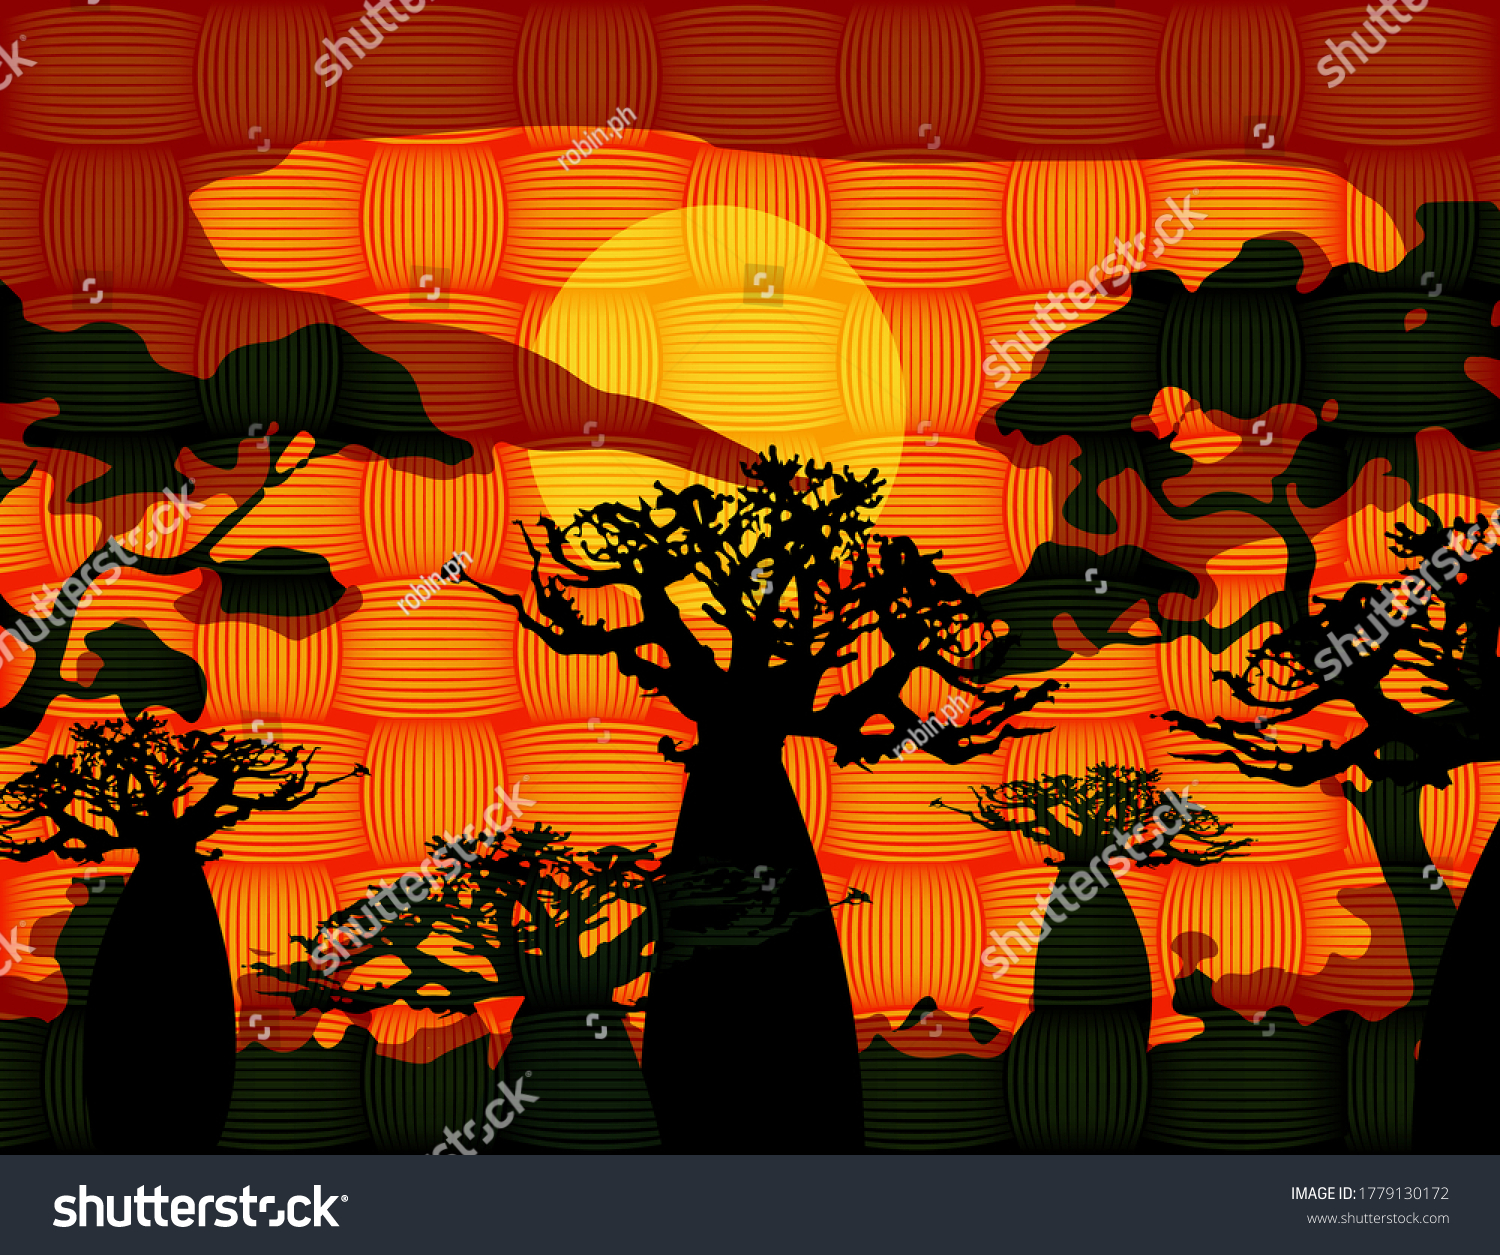 SVG of sunset with landscape of baobab trees. Forest of Boab or Baobab Tree background. African Wax Print fabric, weaved fiber pattern batik. Vector cartoon illustration, Andasonia tree silhouette icon svg